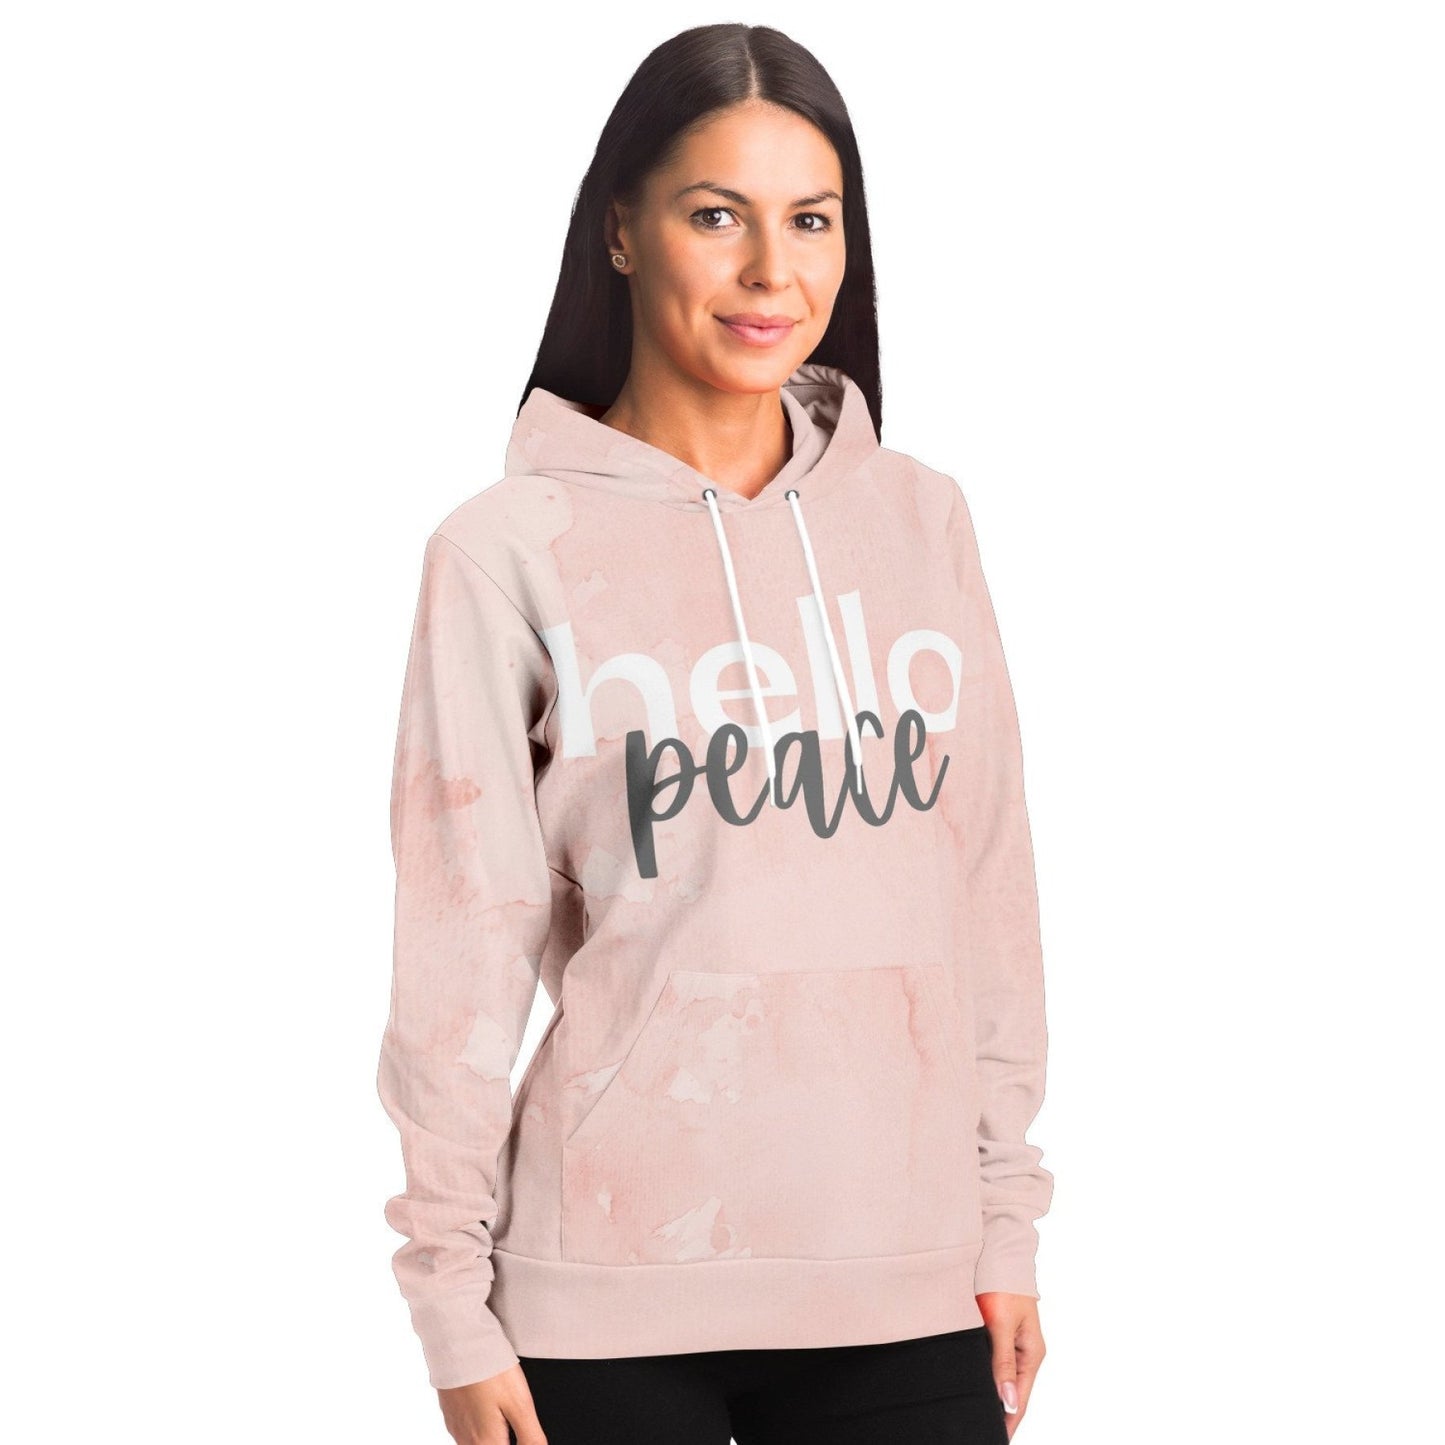 Hoodie Graphic - Hello Peace